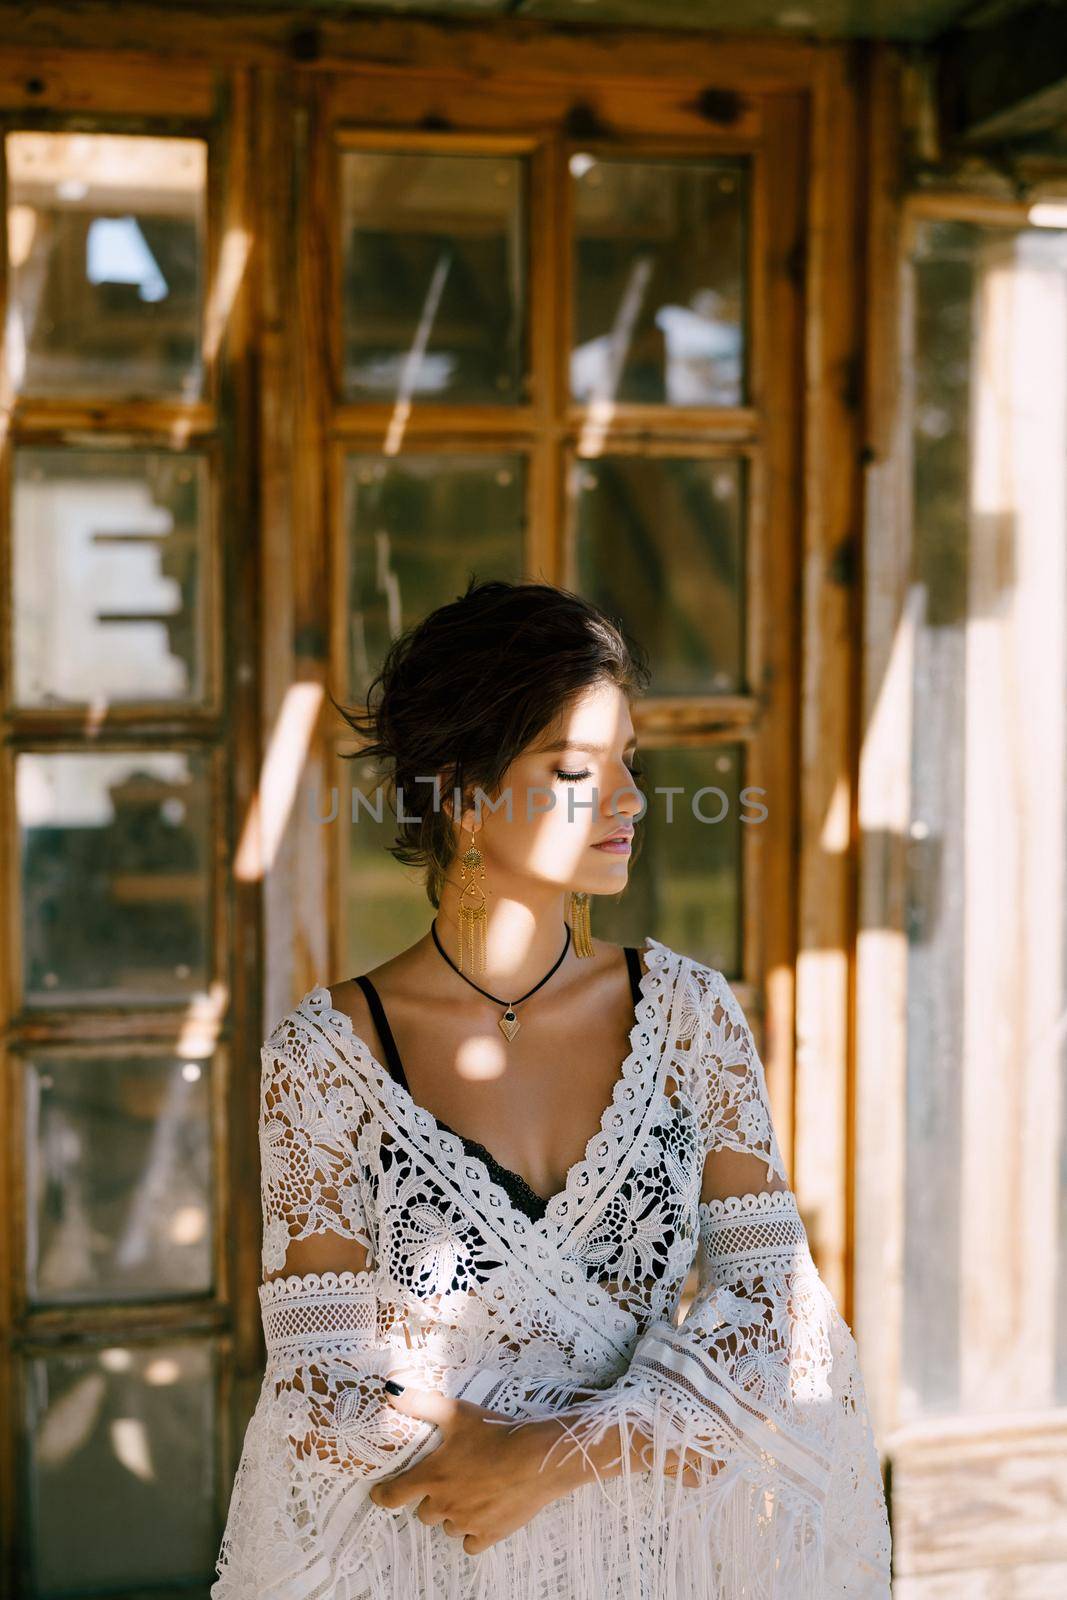 Woman in a white lace cape sits near an antique wooden door. Portrait by Nadtochiy